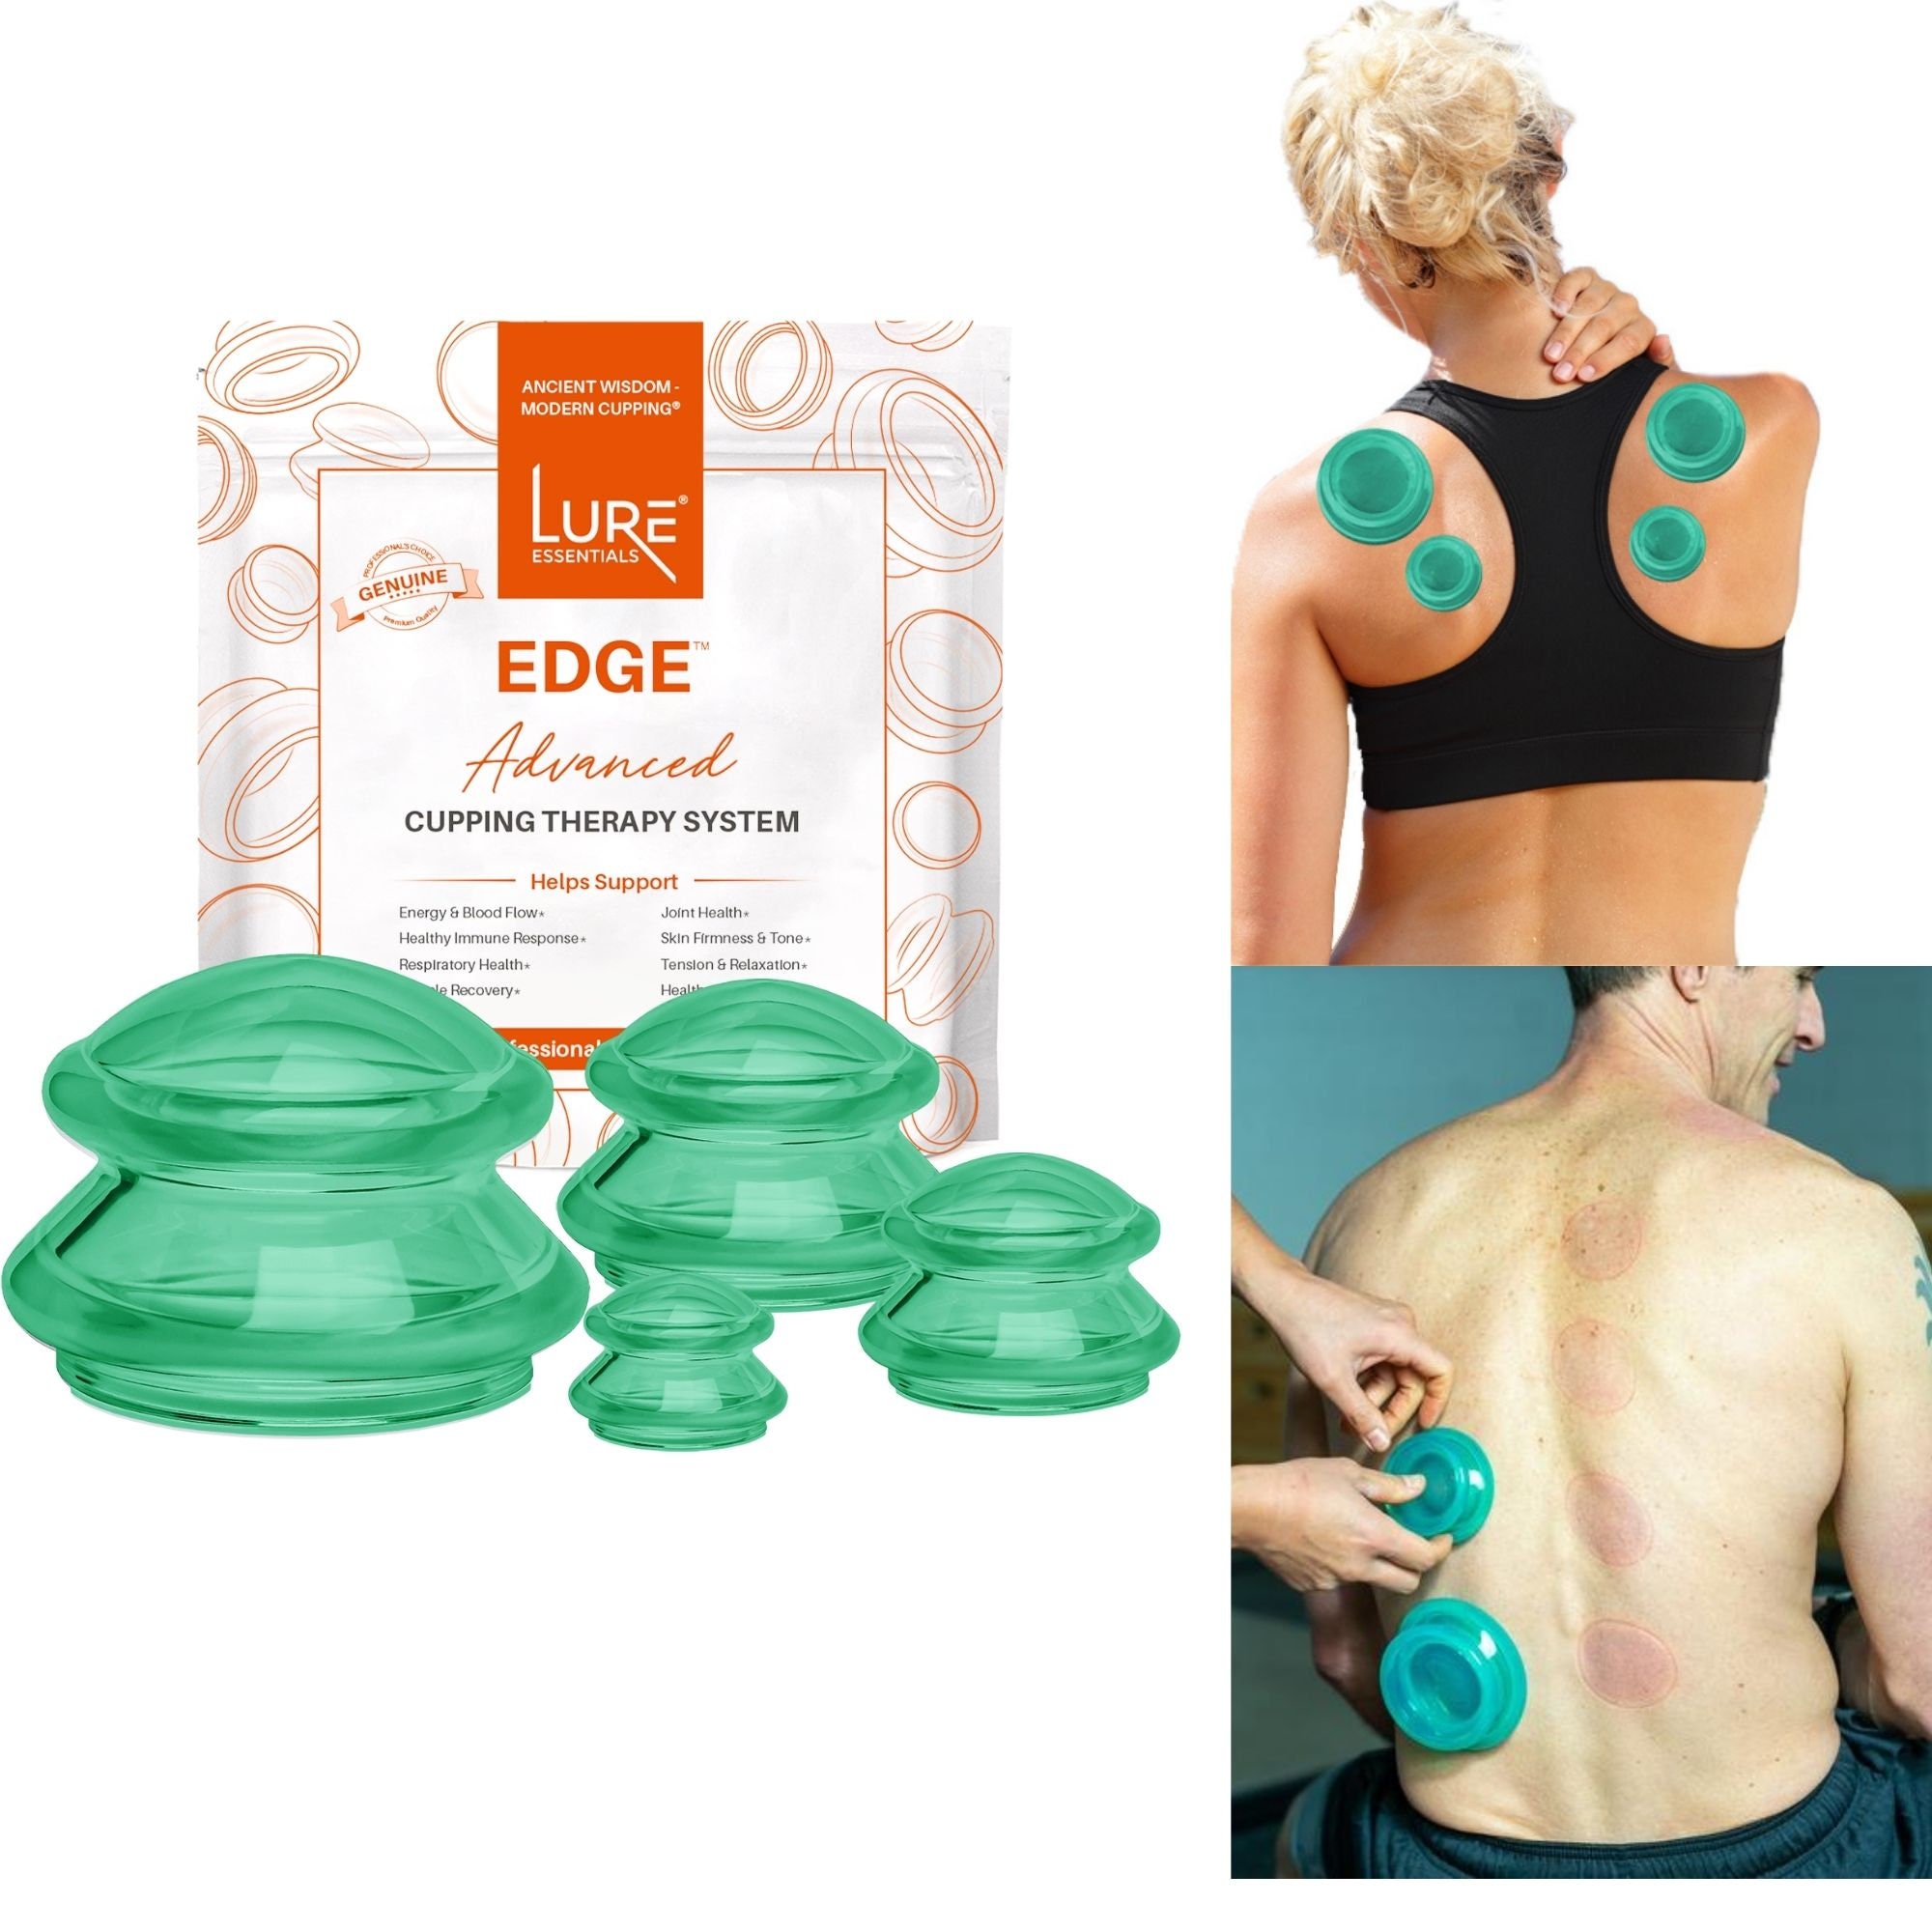 Lure Essentials Anti Cellulite Cupping Set (1 Large, 1 Small Cup)